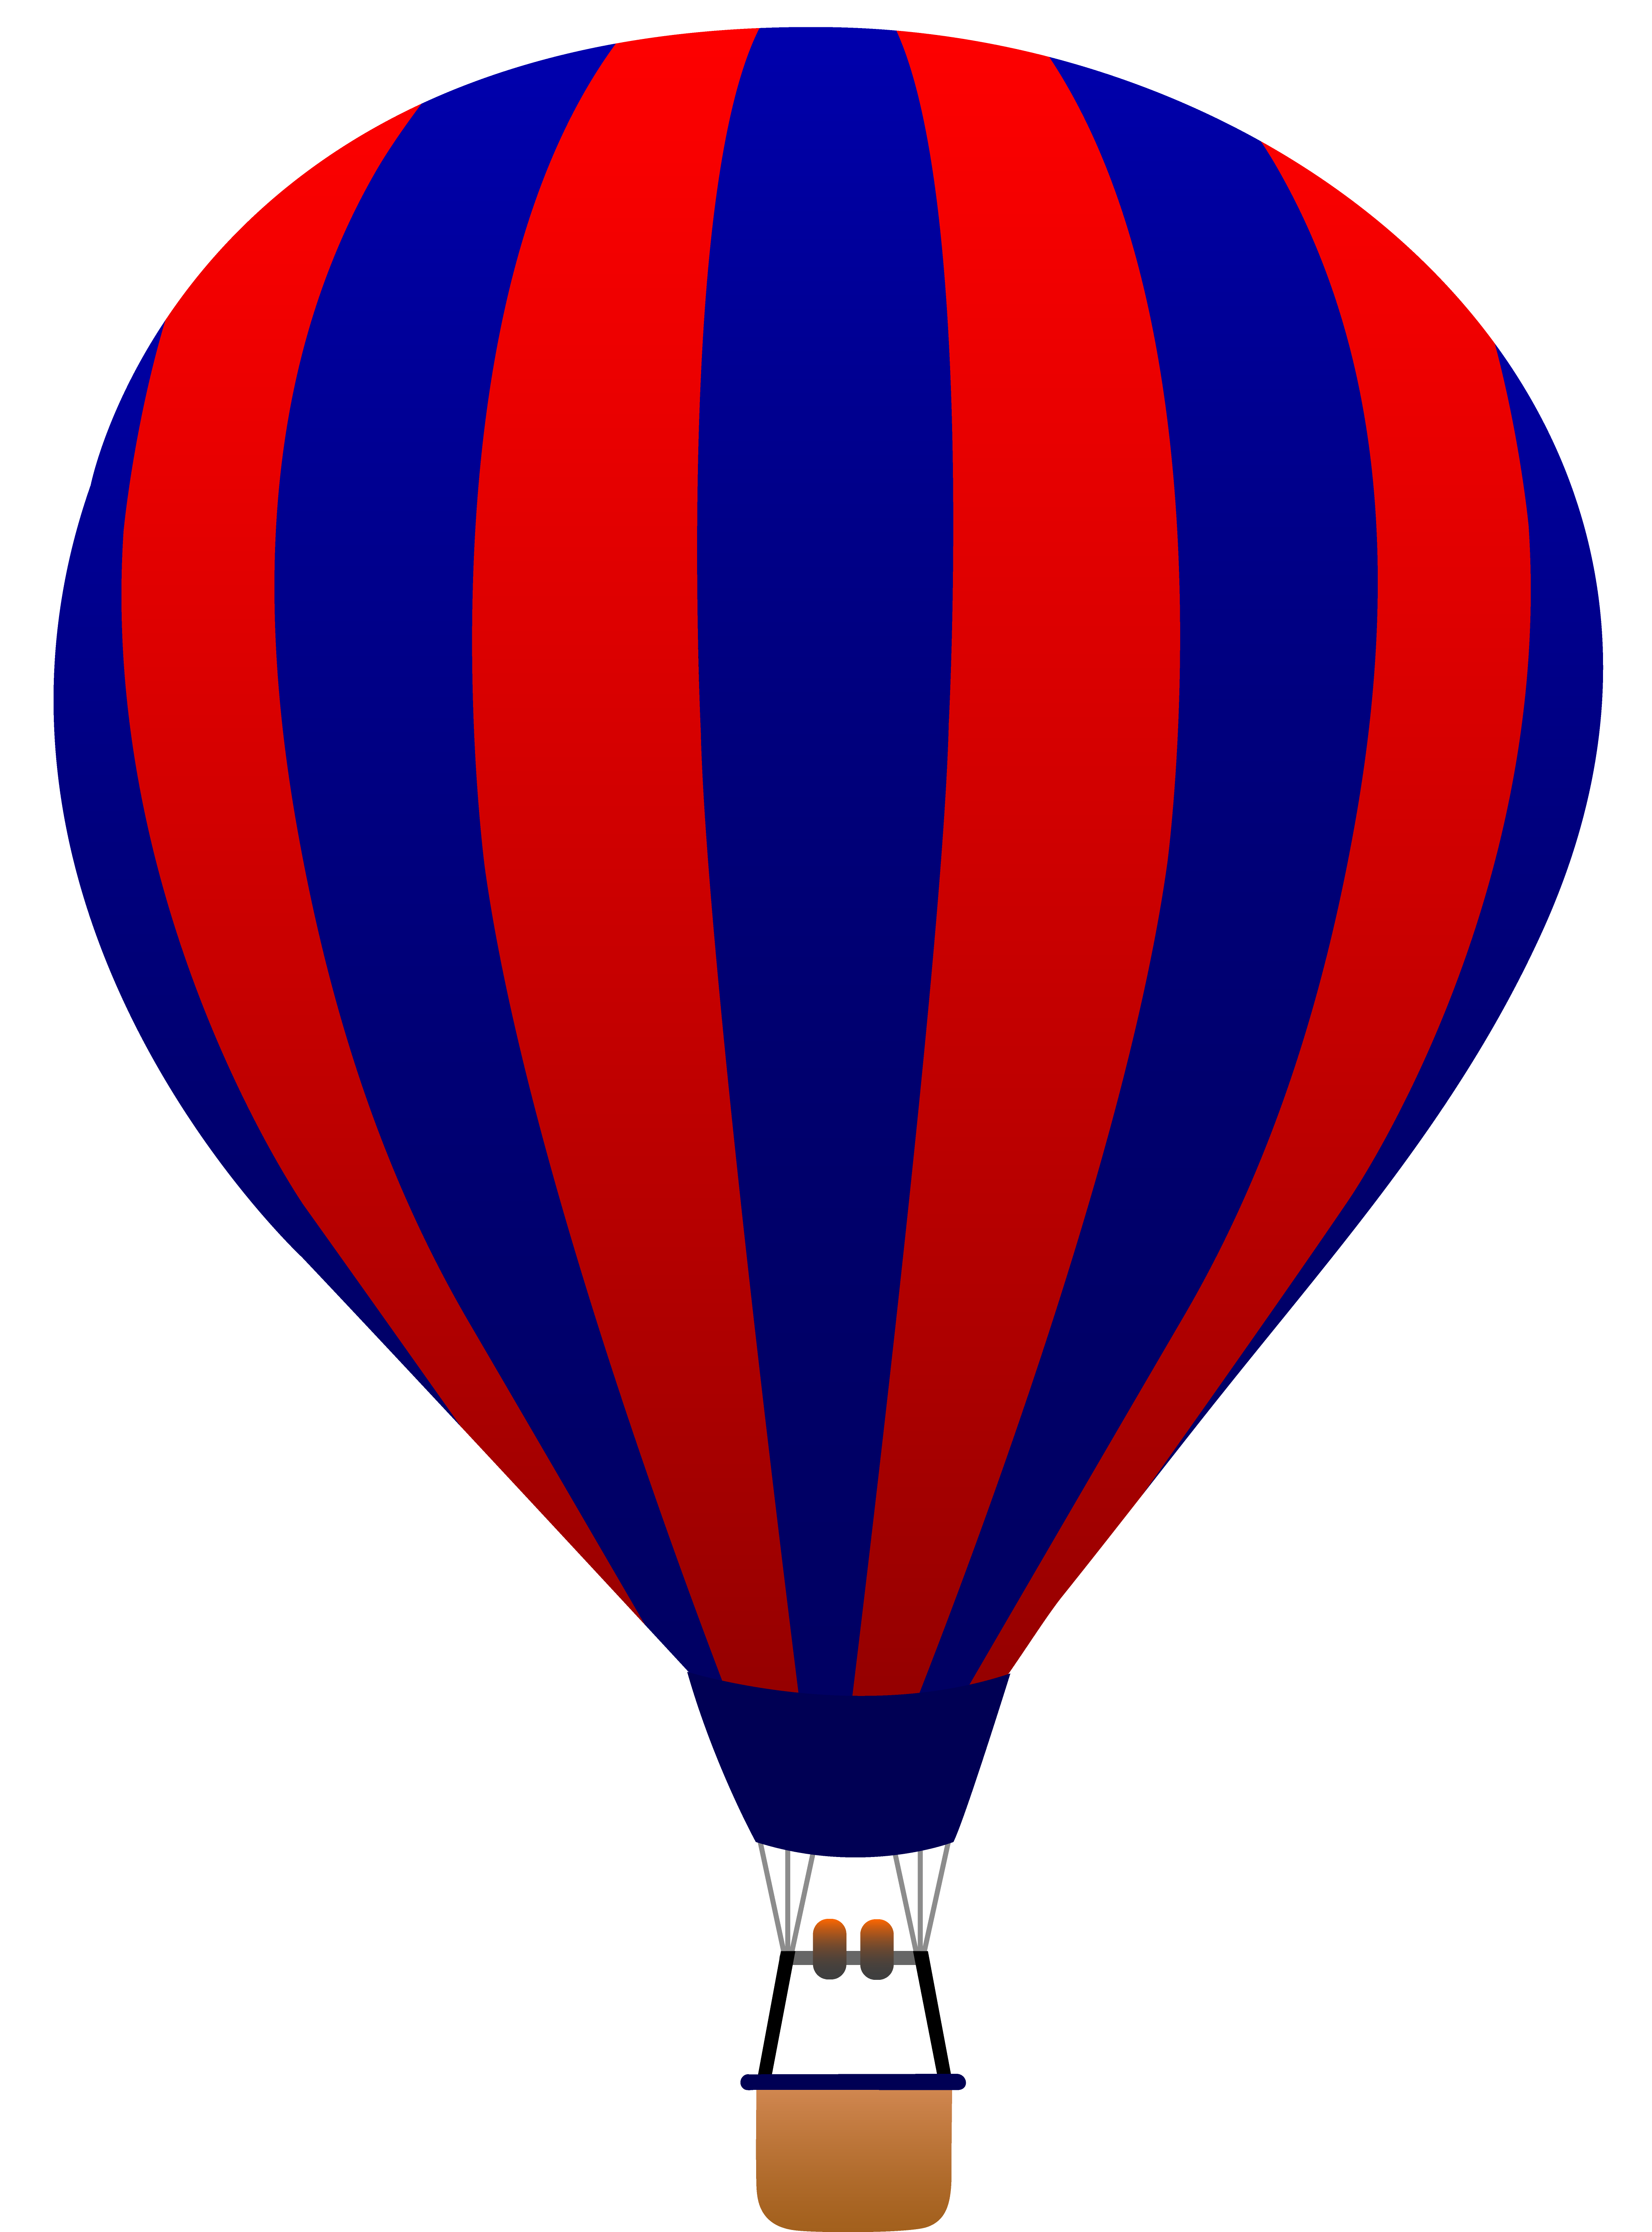 Red and Blue Striped Hot Air Balloon